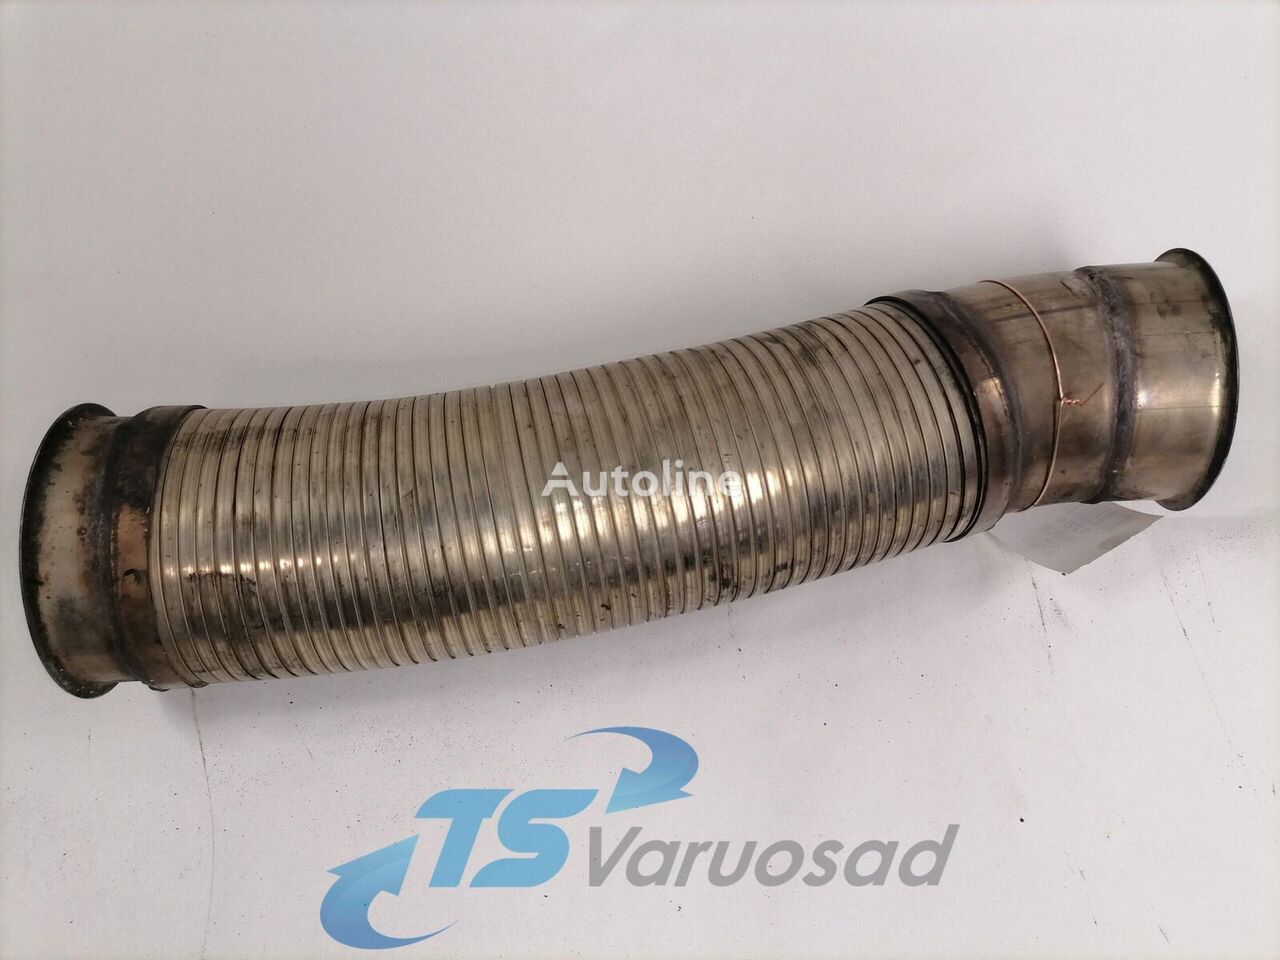 Scania Exhaust pipe 68019 muffler corrugation for Scania G400 truck tractor